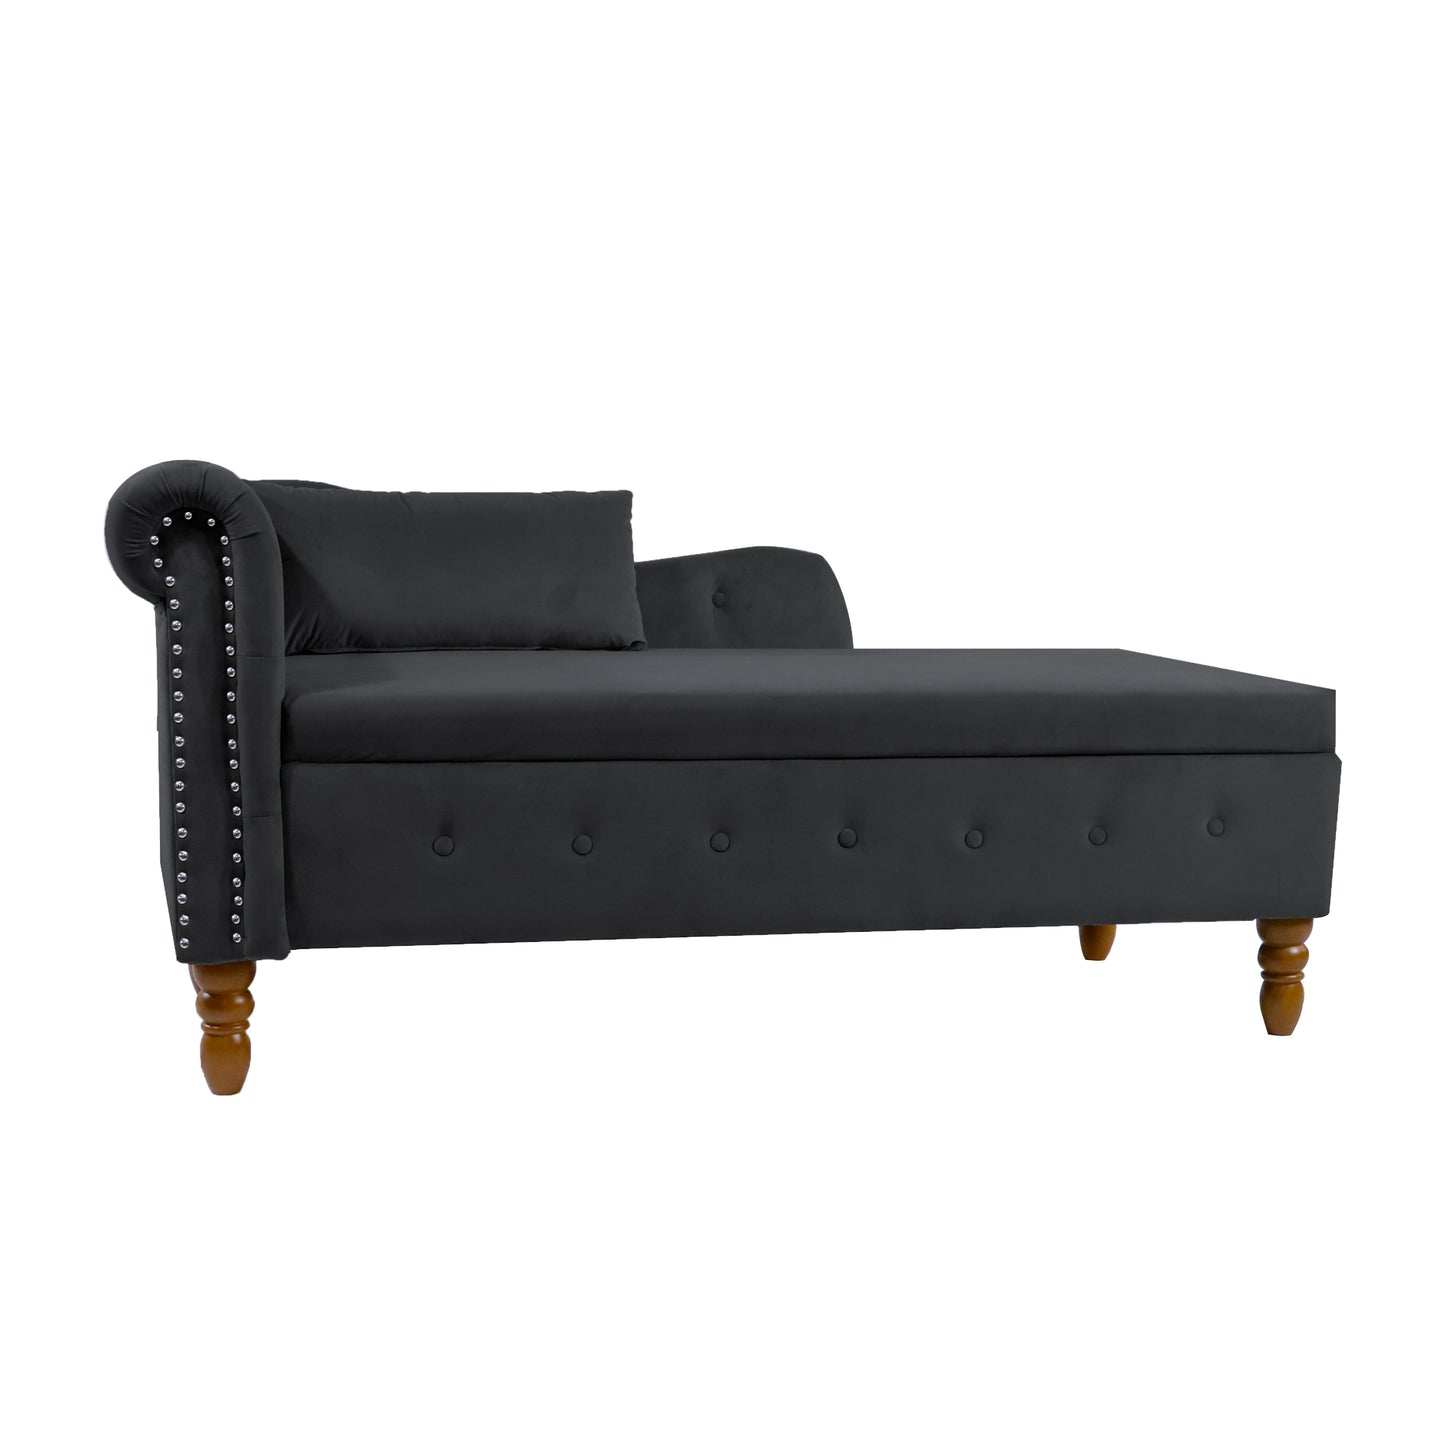 Black Chaise Lounge Indoor, Velvet Lounge Chair for Bedroom with Storage & Pillow, Modern Upholstered Rolled Arm Chase Lounge for Sleeping with Nailhead Trim for Living Room Bedroom Office